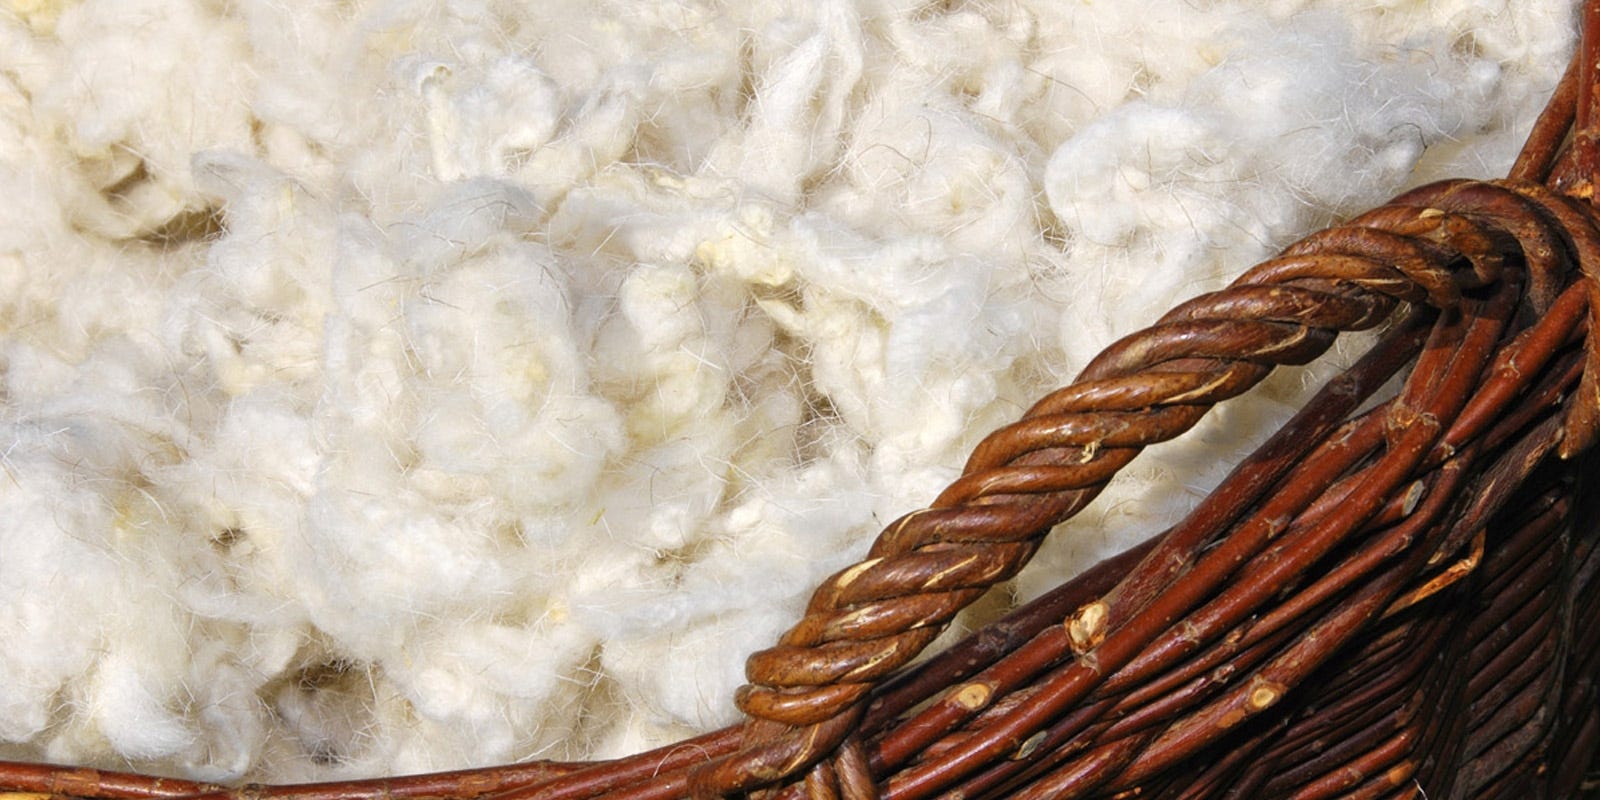 Is Wool A Natural Fire Retardant?